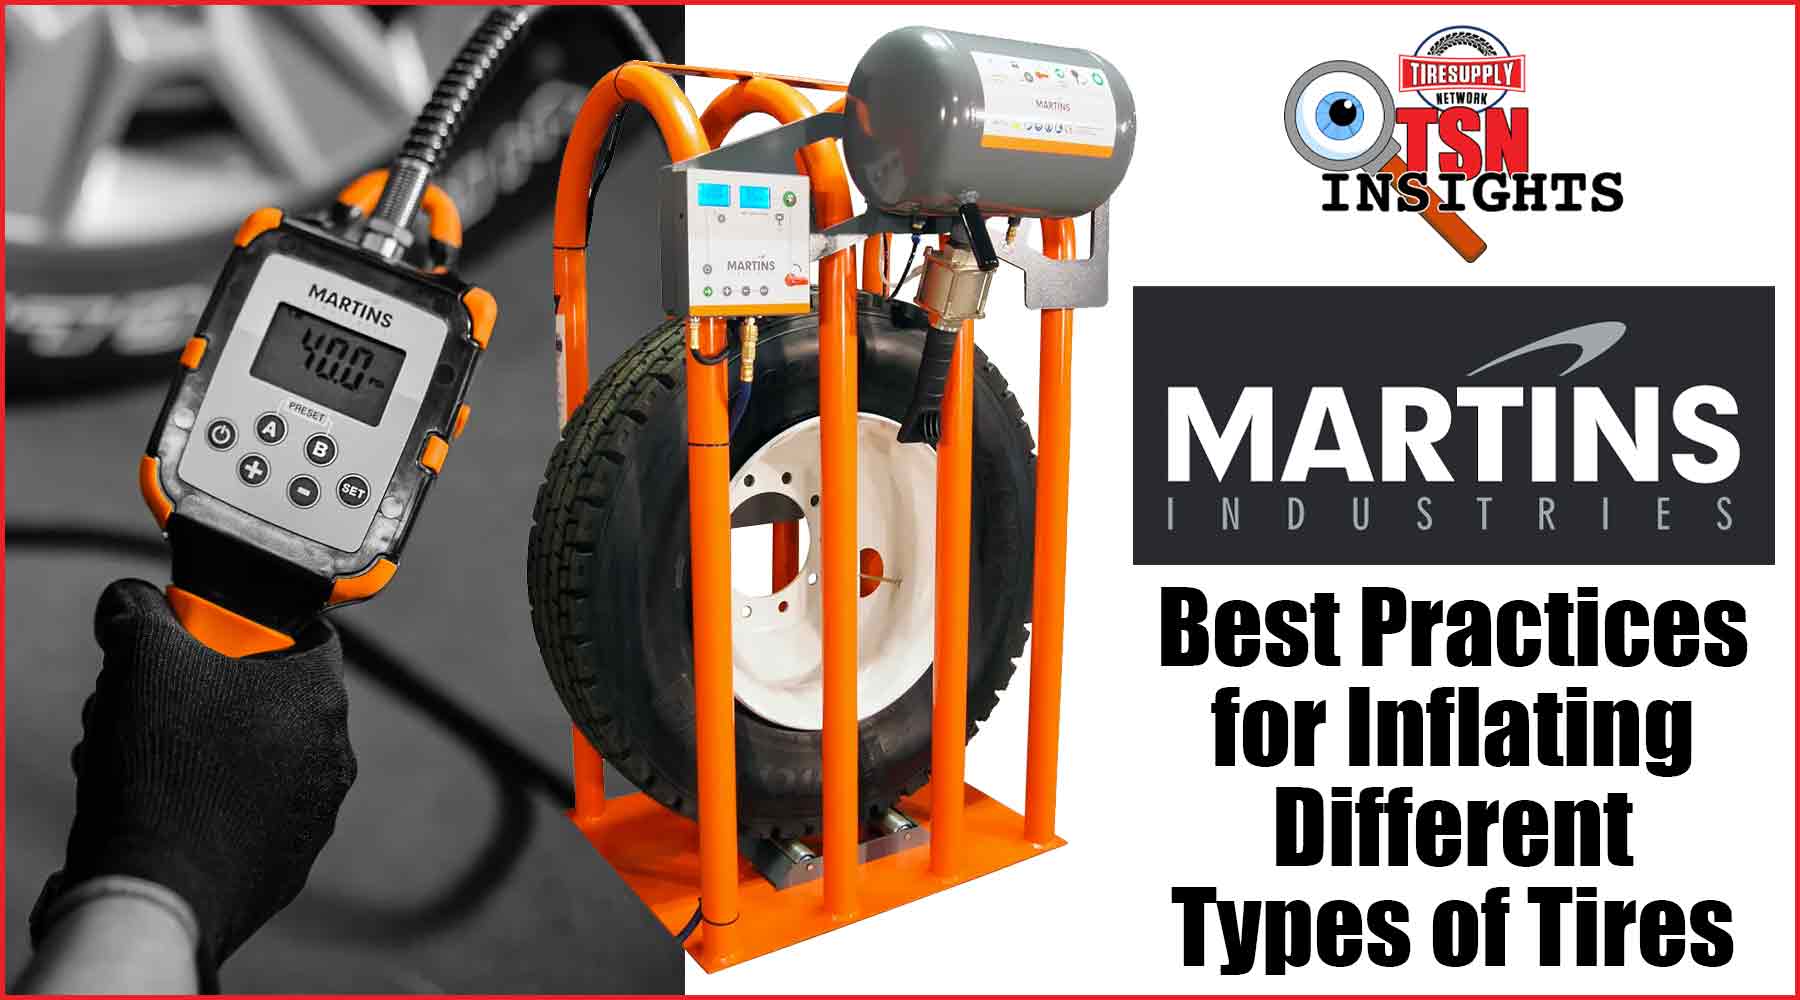 Martins Industries Best Practices for Inflating Different Types of Tires